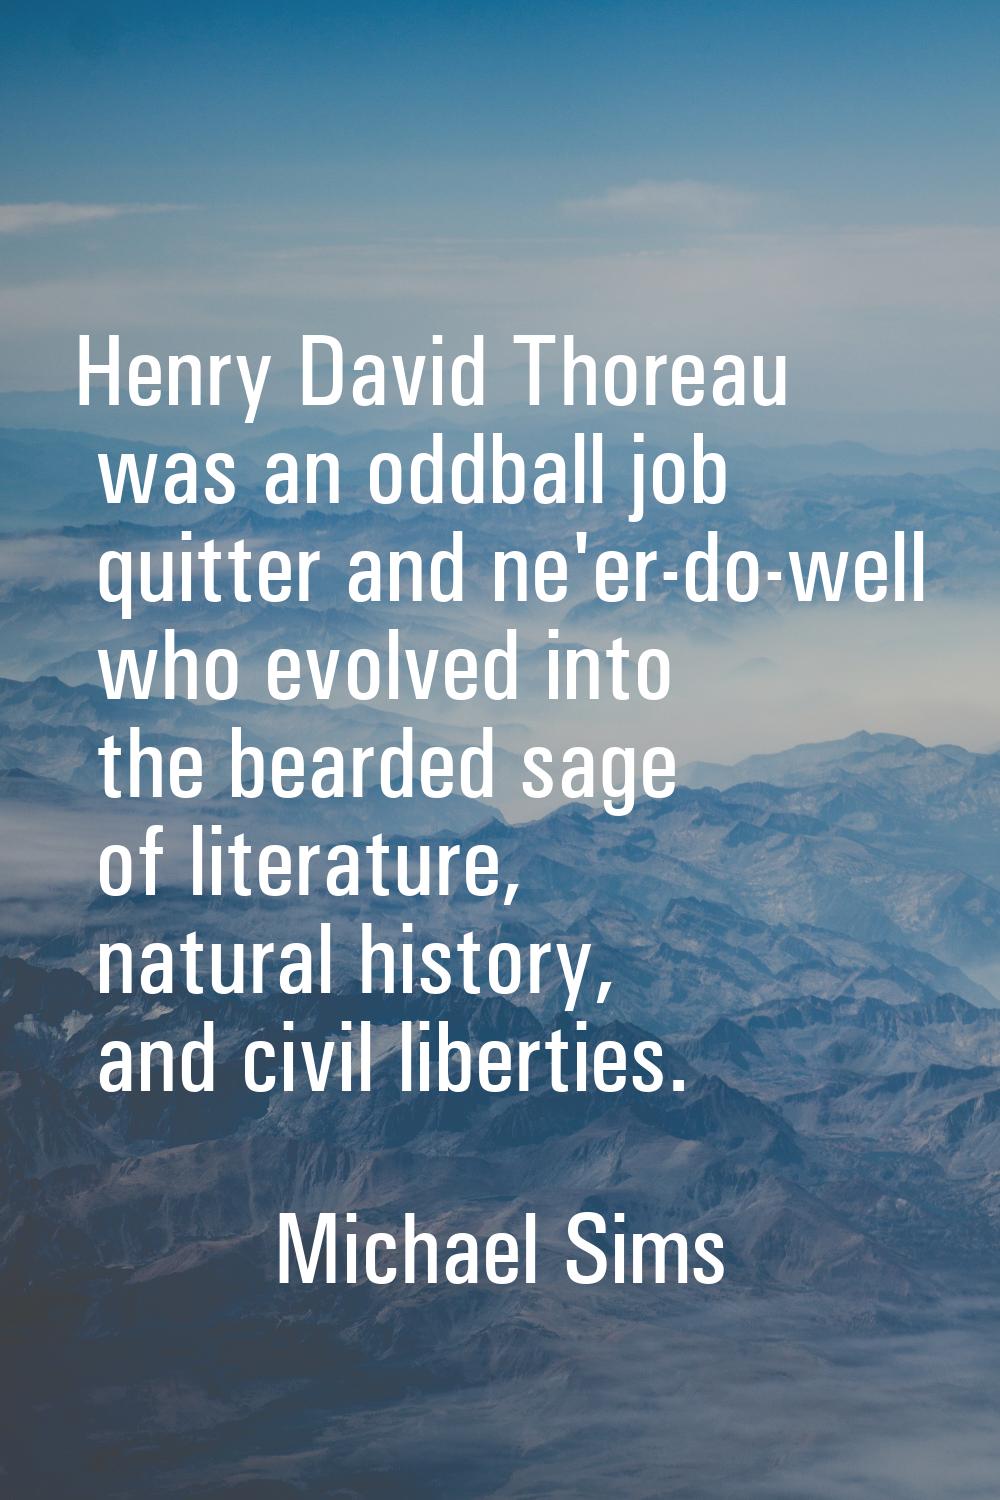 Henry David Thoreau was an oddball job quitter and ne'er-do-well who evolved into the bearded sage 